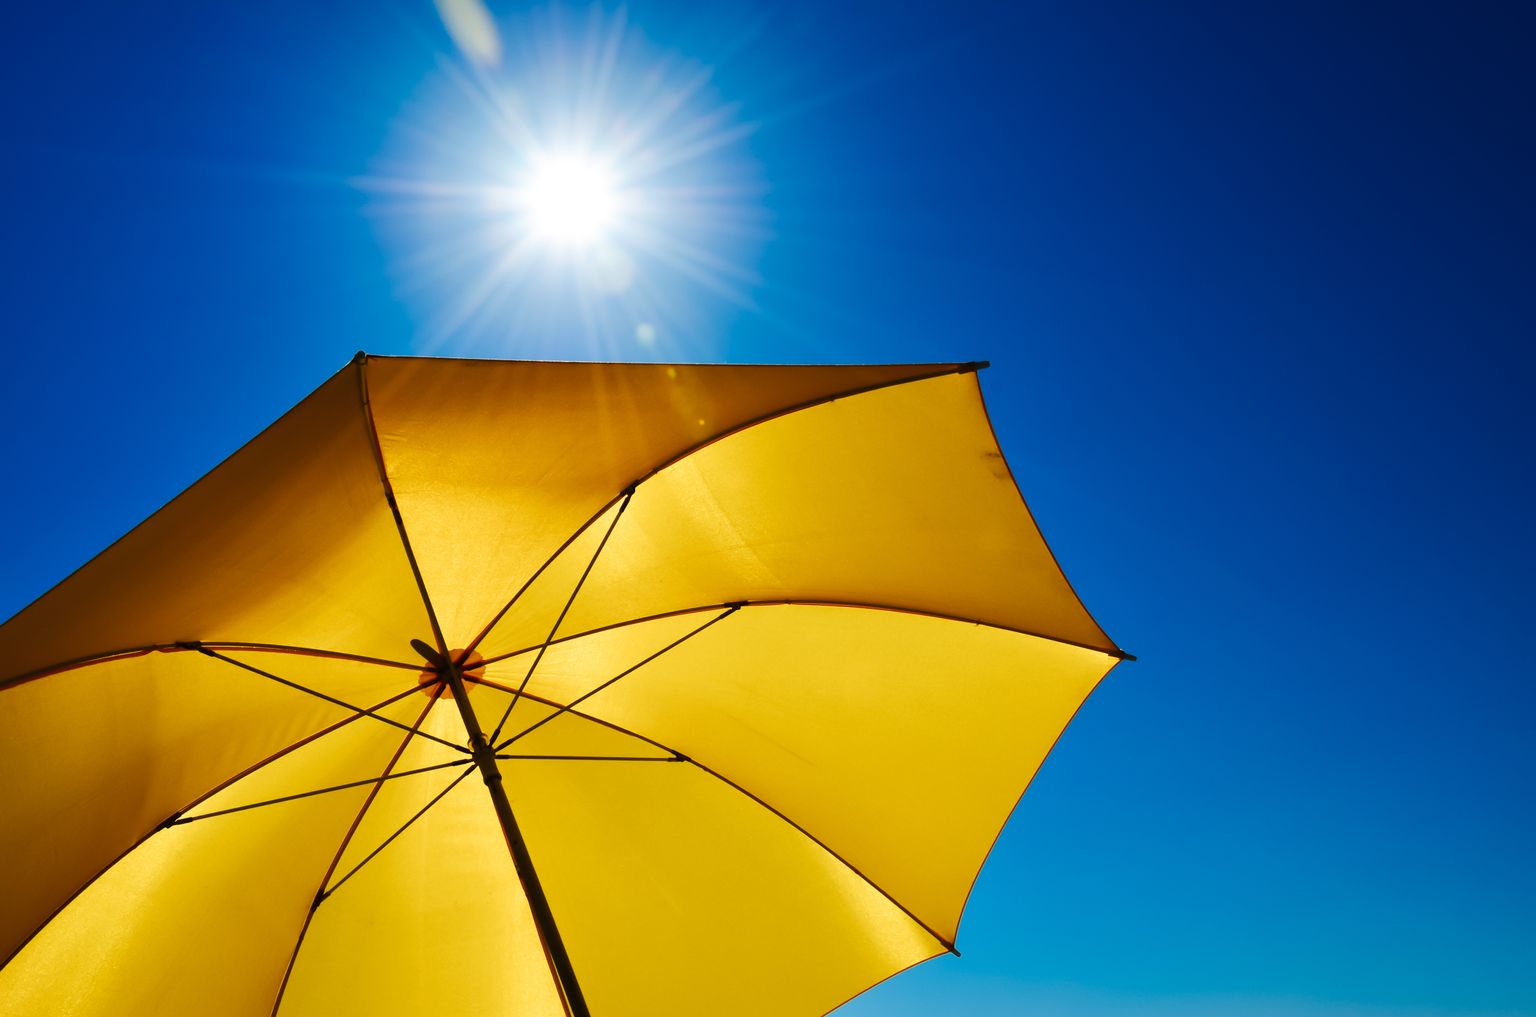 Yellow parasol with blue sky